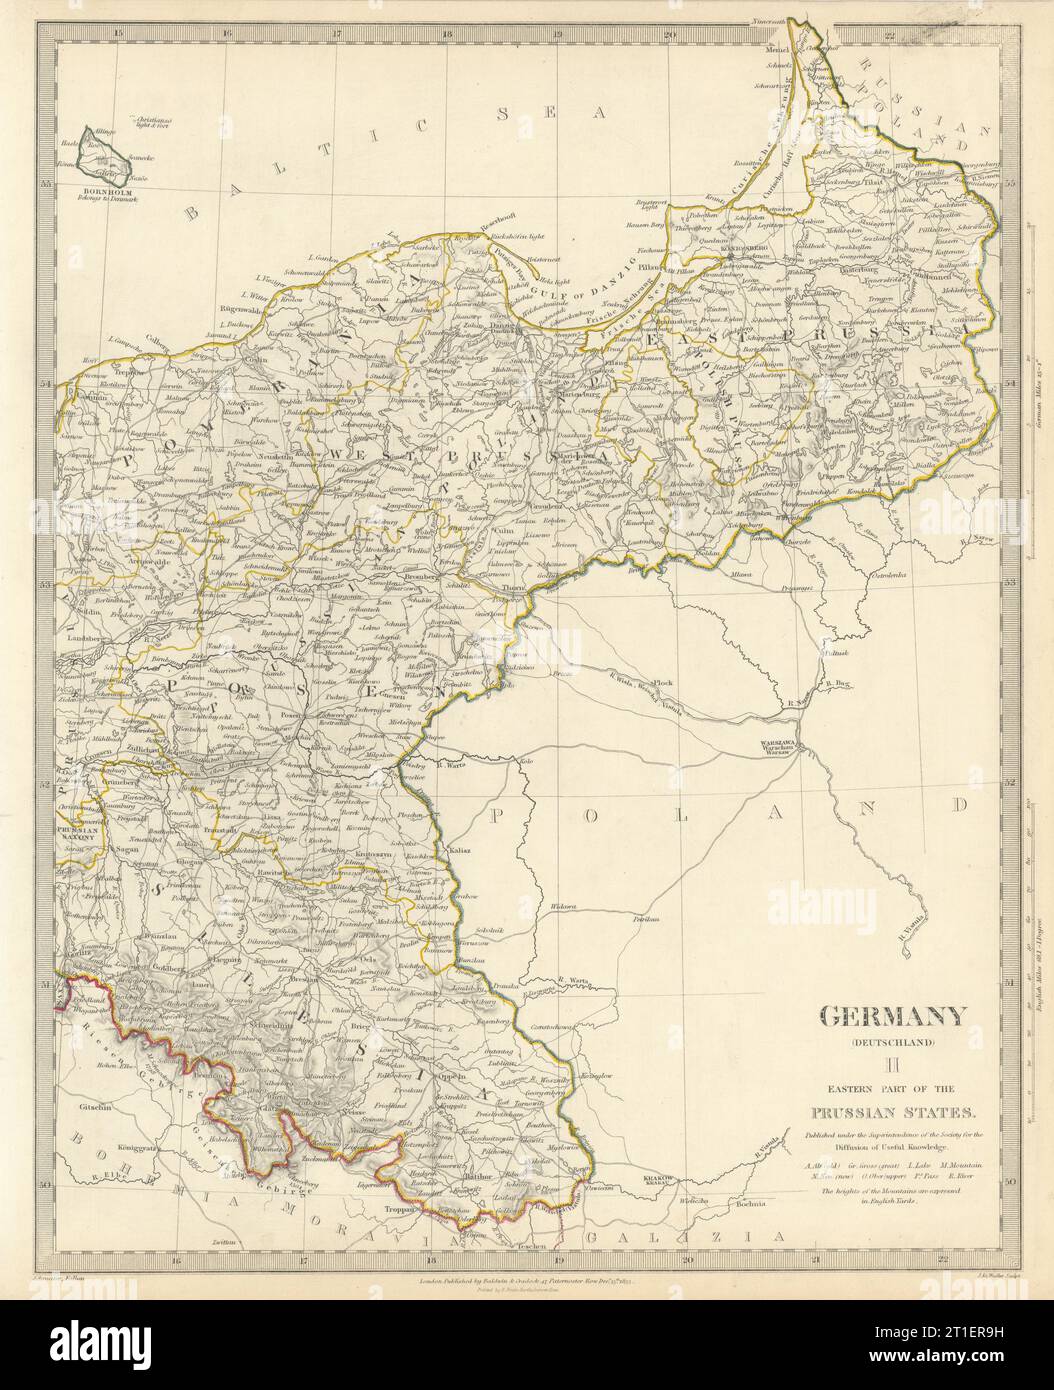 ALLEMAGNE DEUTSCHLAND.Eastern Prussian States.Silesia;Pomerania.SDUK 1844 map Banque D'Images